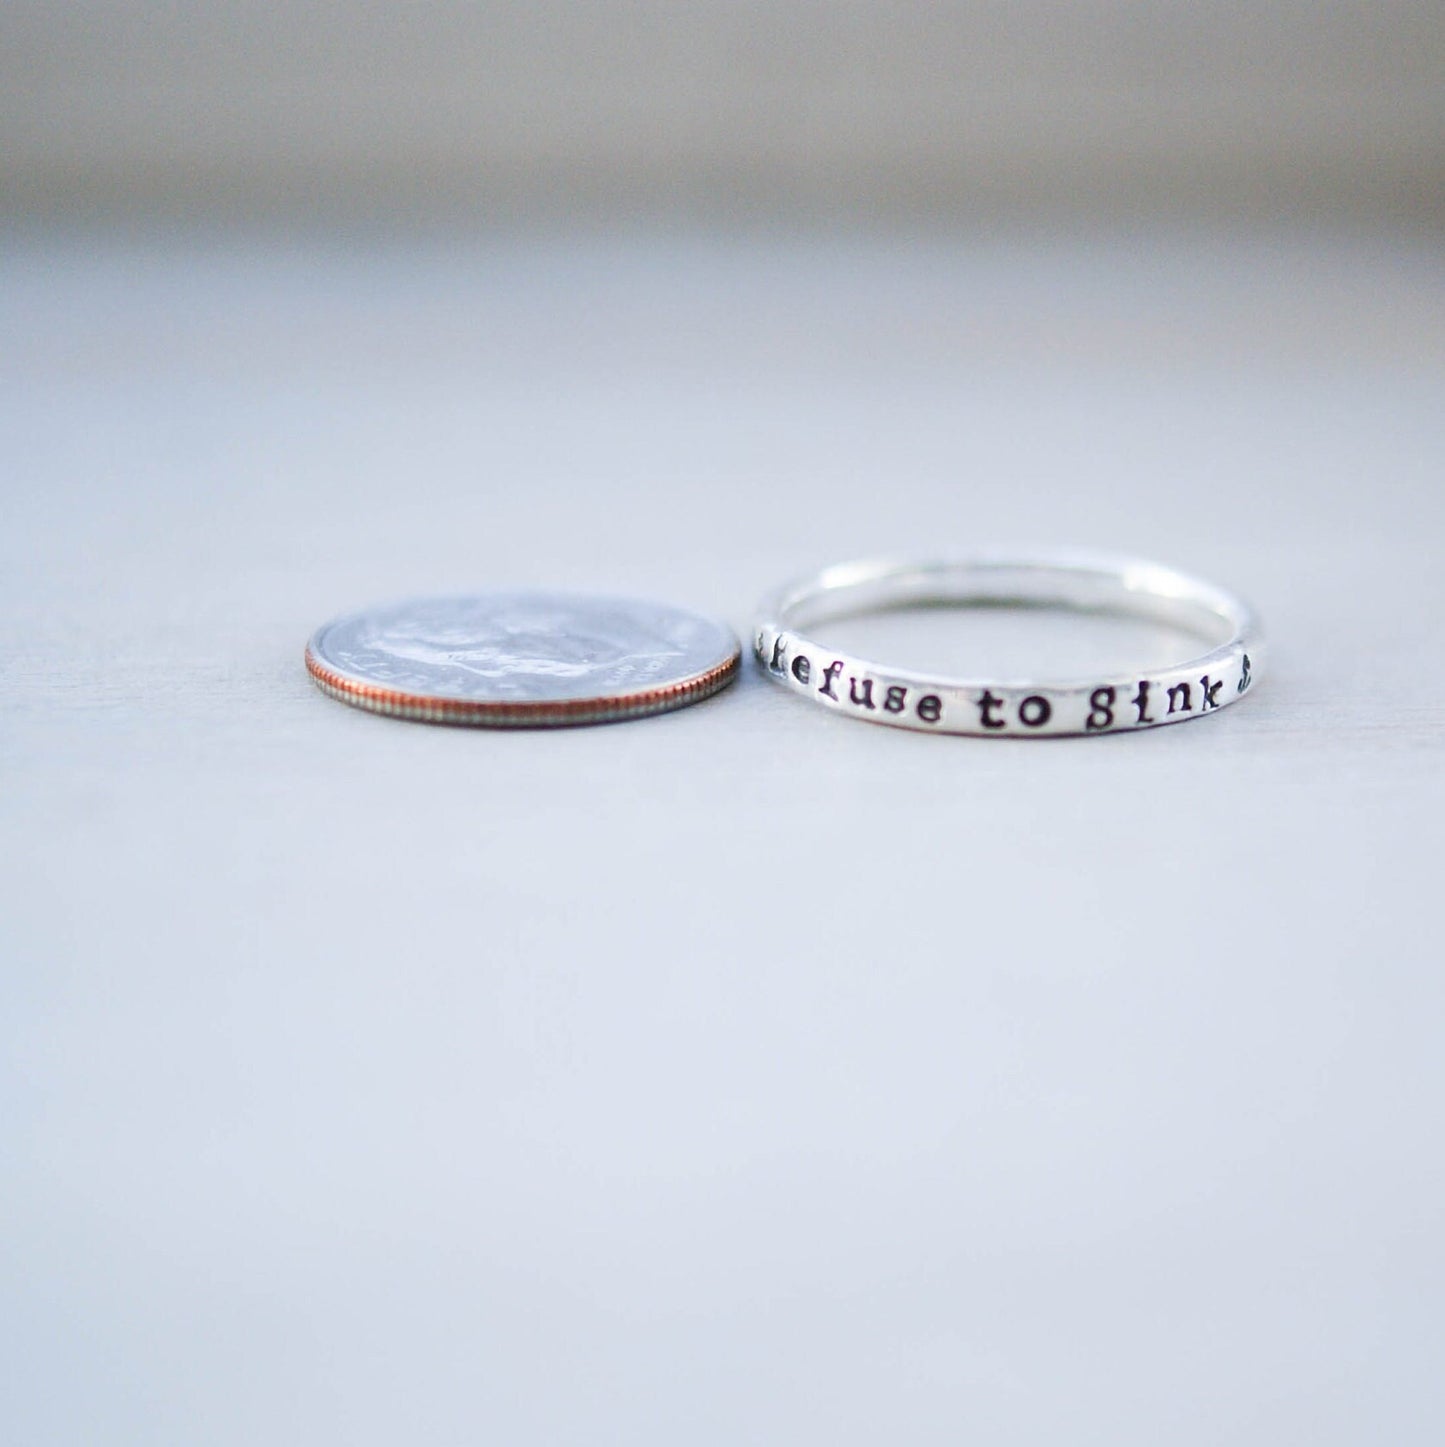 Sterling silver ring handstamped with Refuse to sink next to dime